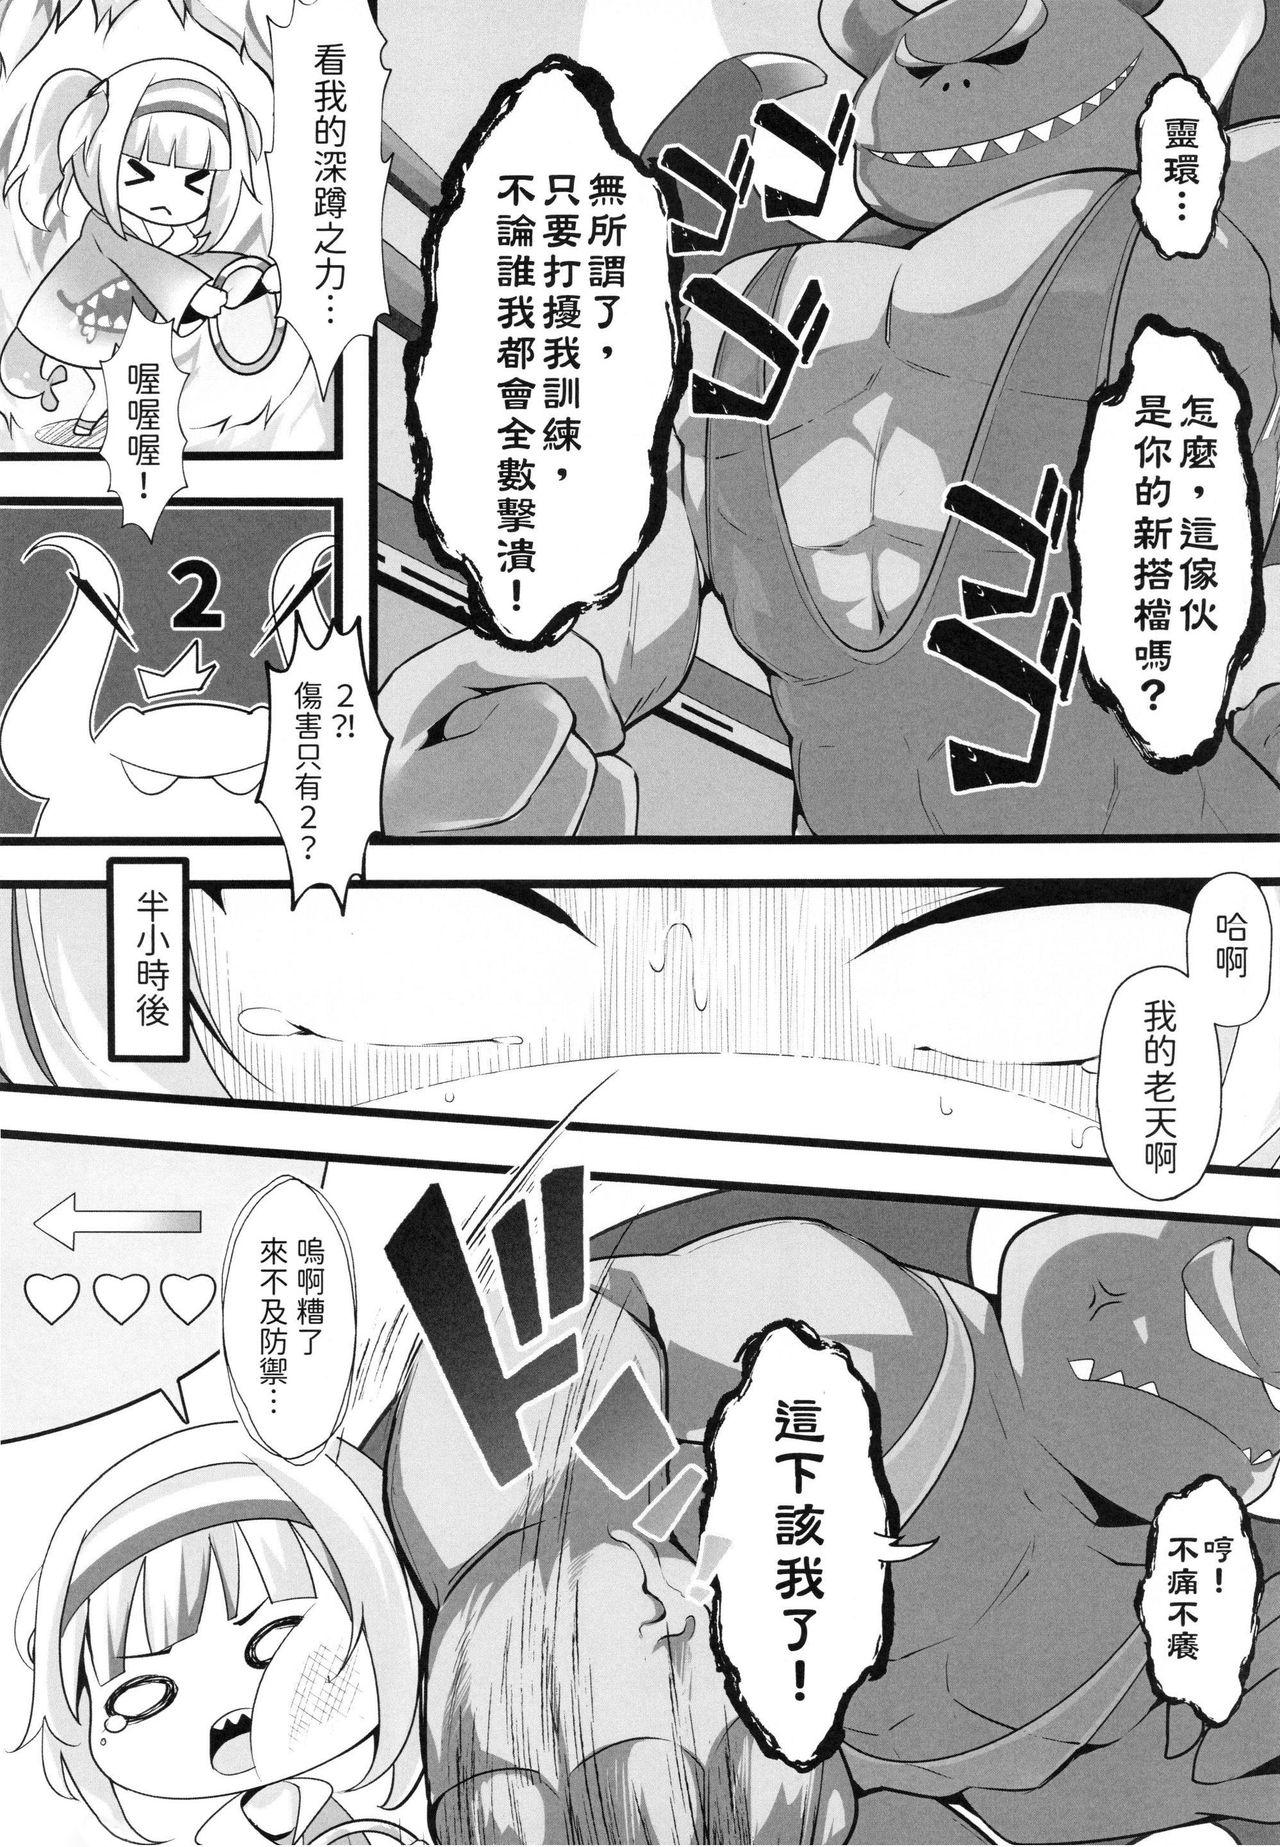 Thot 【台灣FF37】[ちやみ] Let's Sweat (hololive) (Gawr Gura) (Vtuber) [Chinese] [Decensored] - Hololive Ring fit adventure Hardcoresex - Page 5